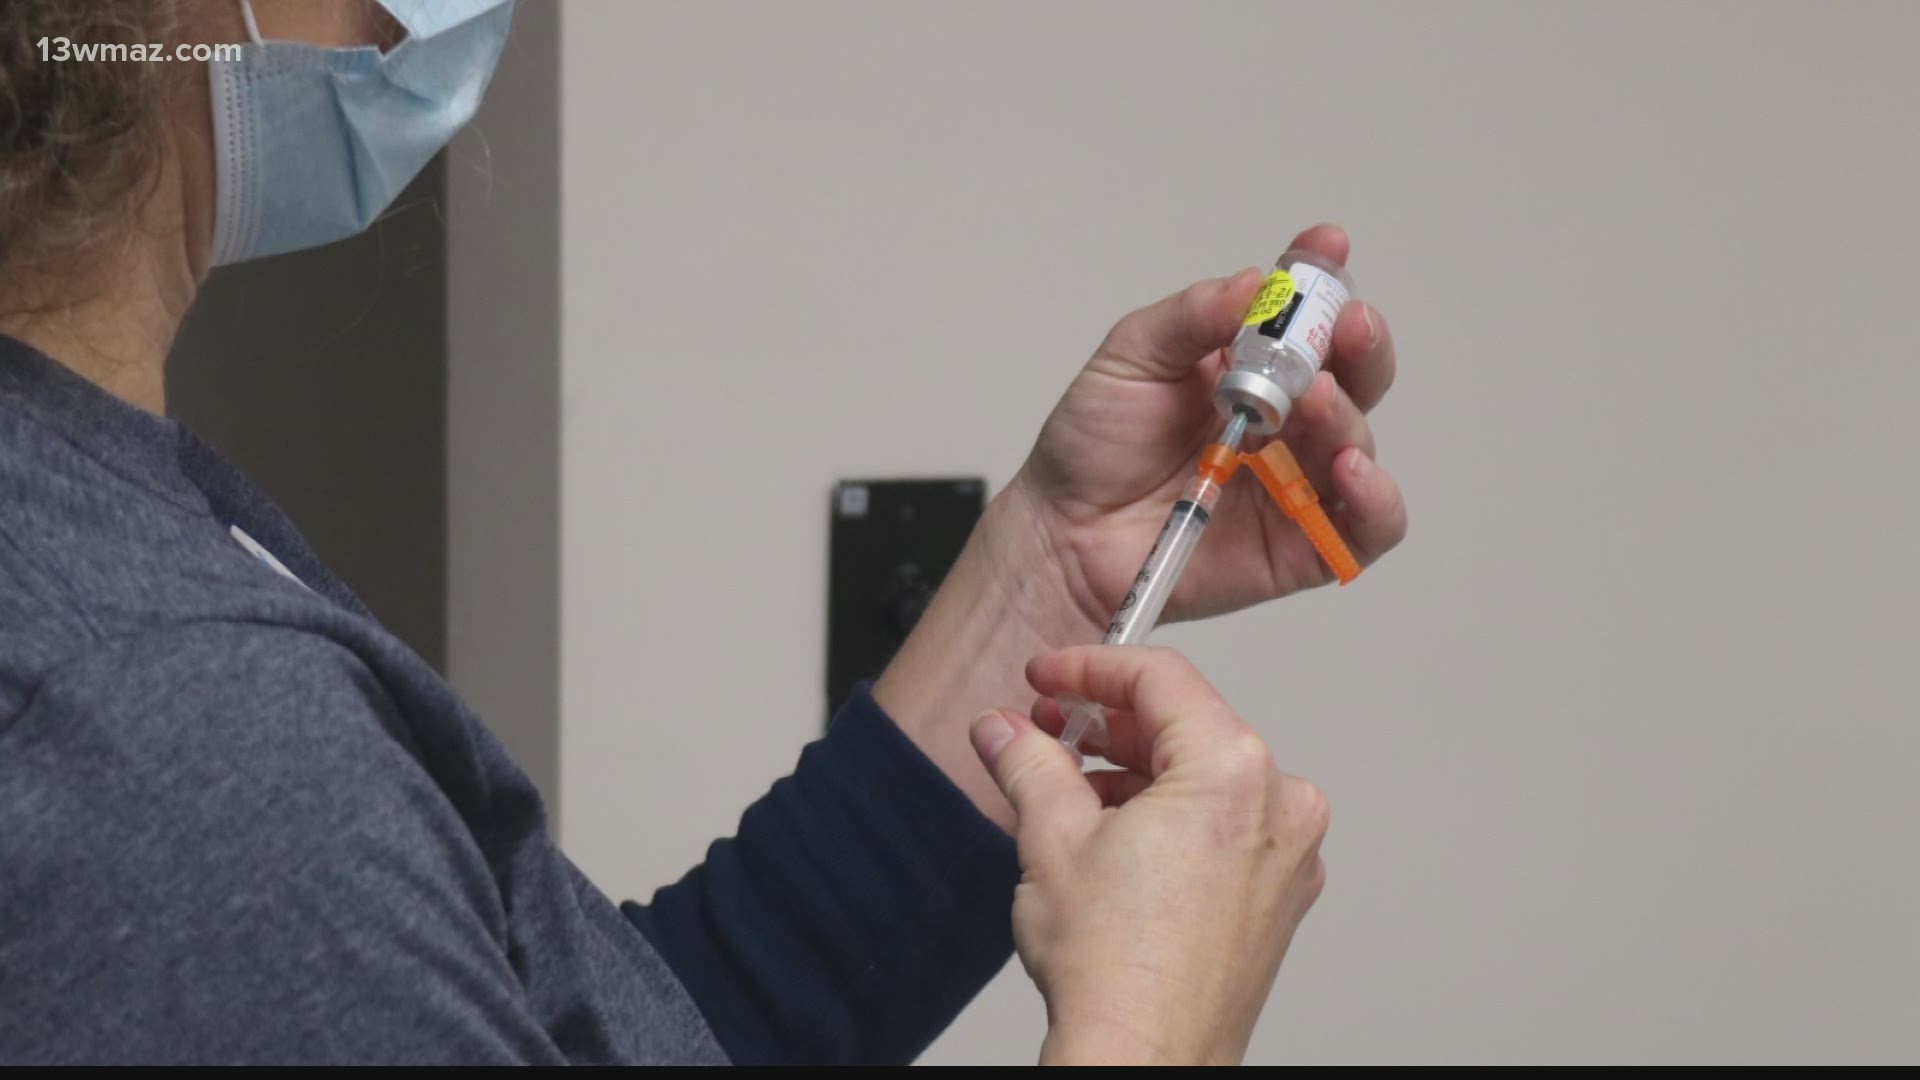 Starting Monday, Central Georgia first responders and adults 65 and over are one step closer to getting the COVID-19 vaccine.